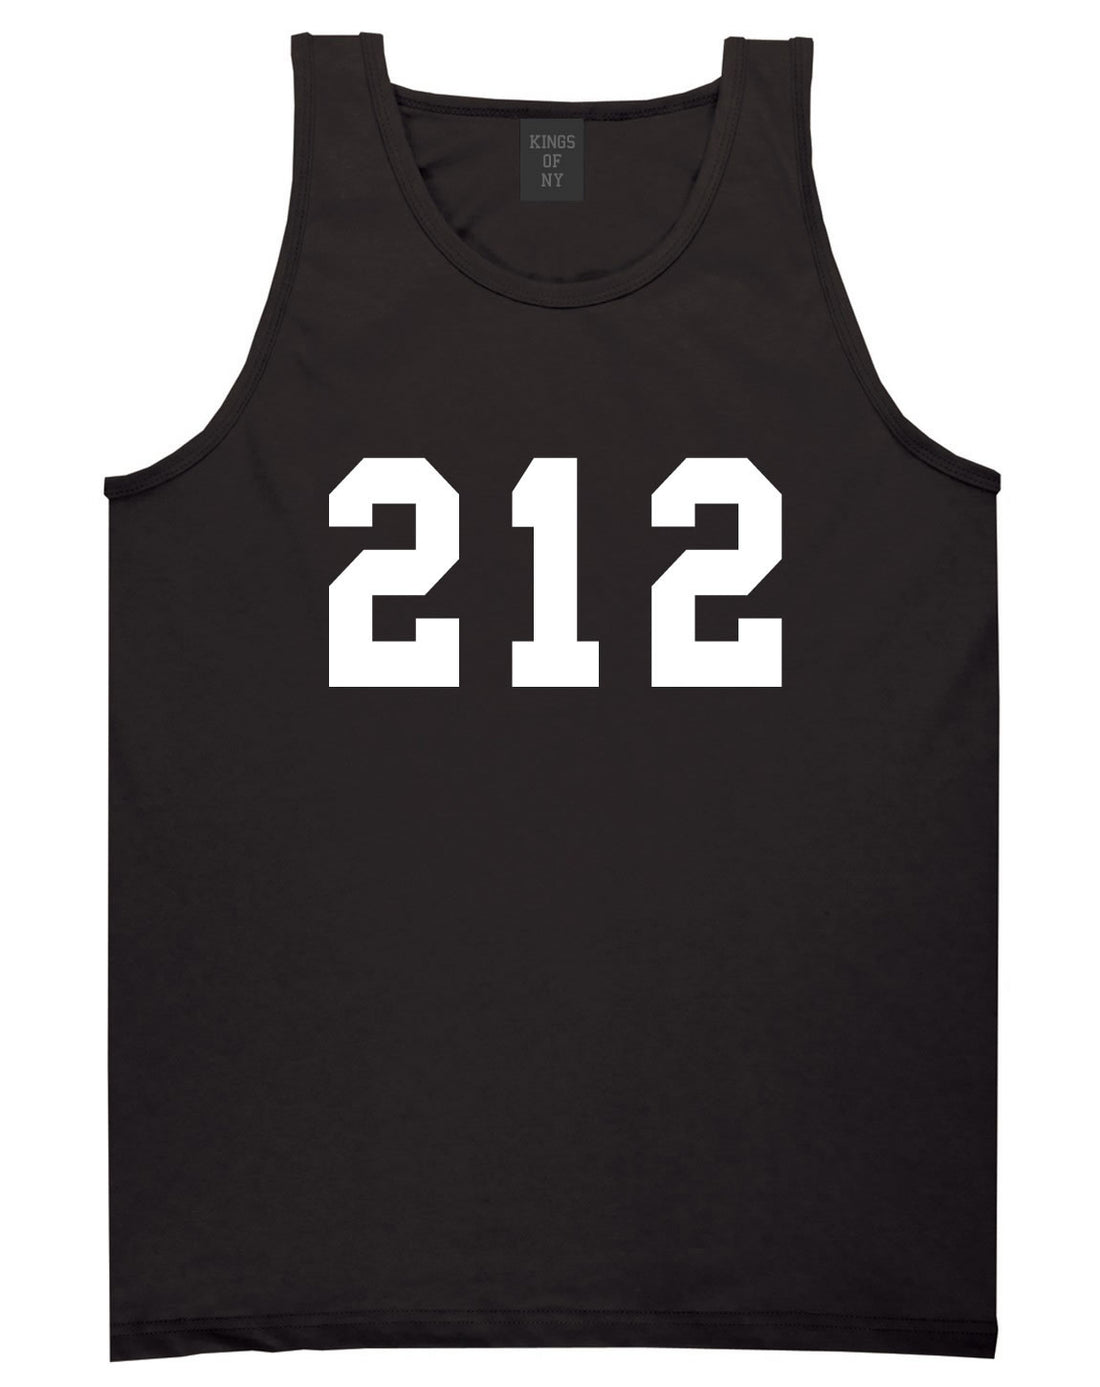 212 New York Area Code Tank Top in Black By Kings Of NY